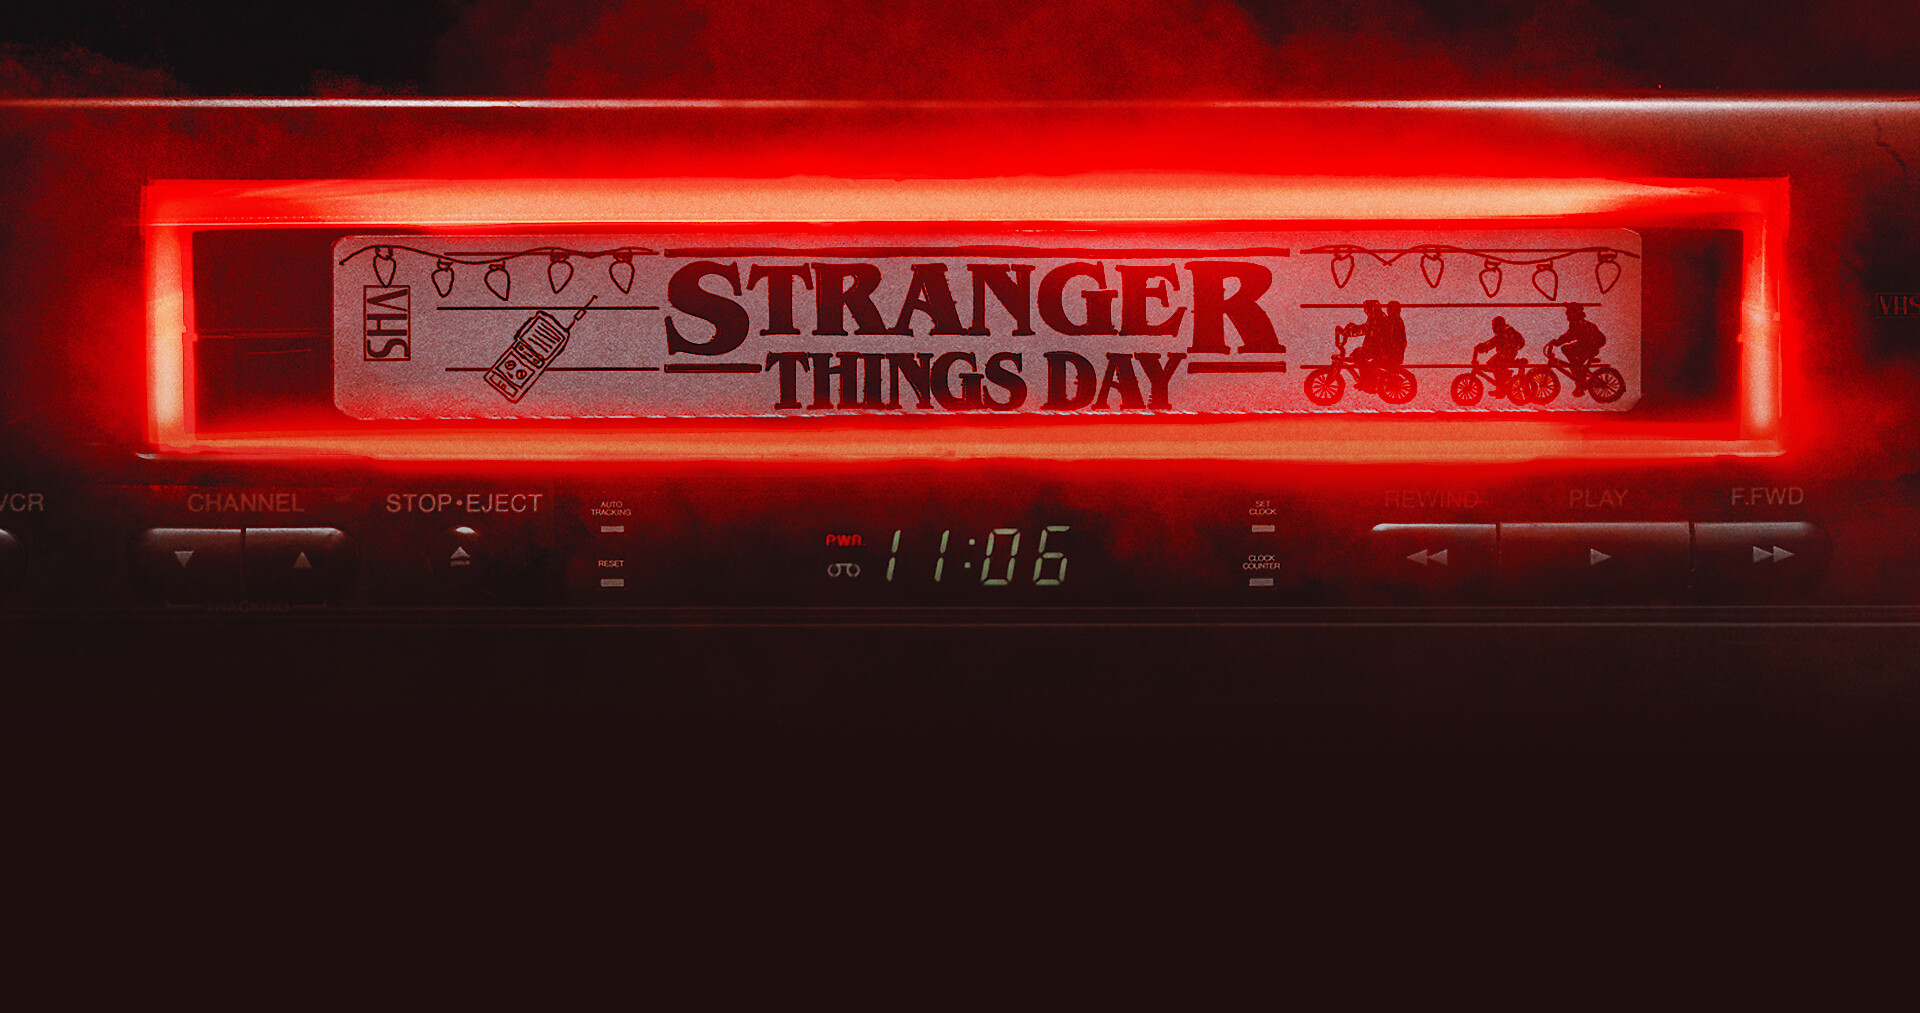 Stranger Things Netflix Exclusive Complete Season 1 and Season 2 Bundle,  DVD / Blu-ray Discs in VHS 